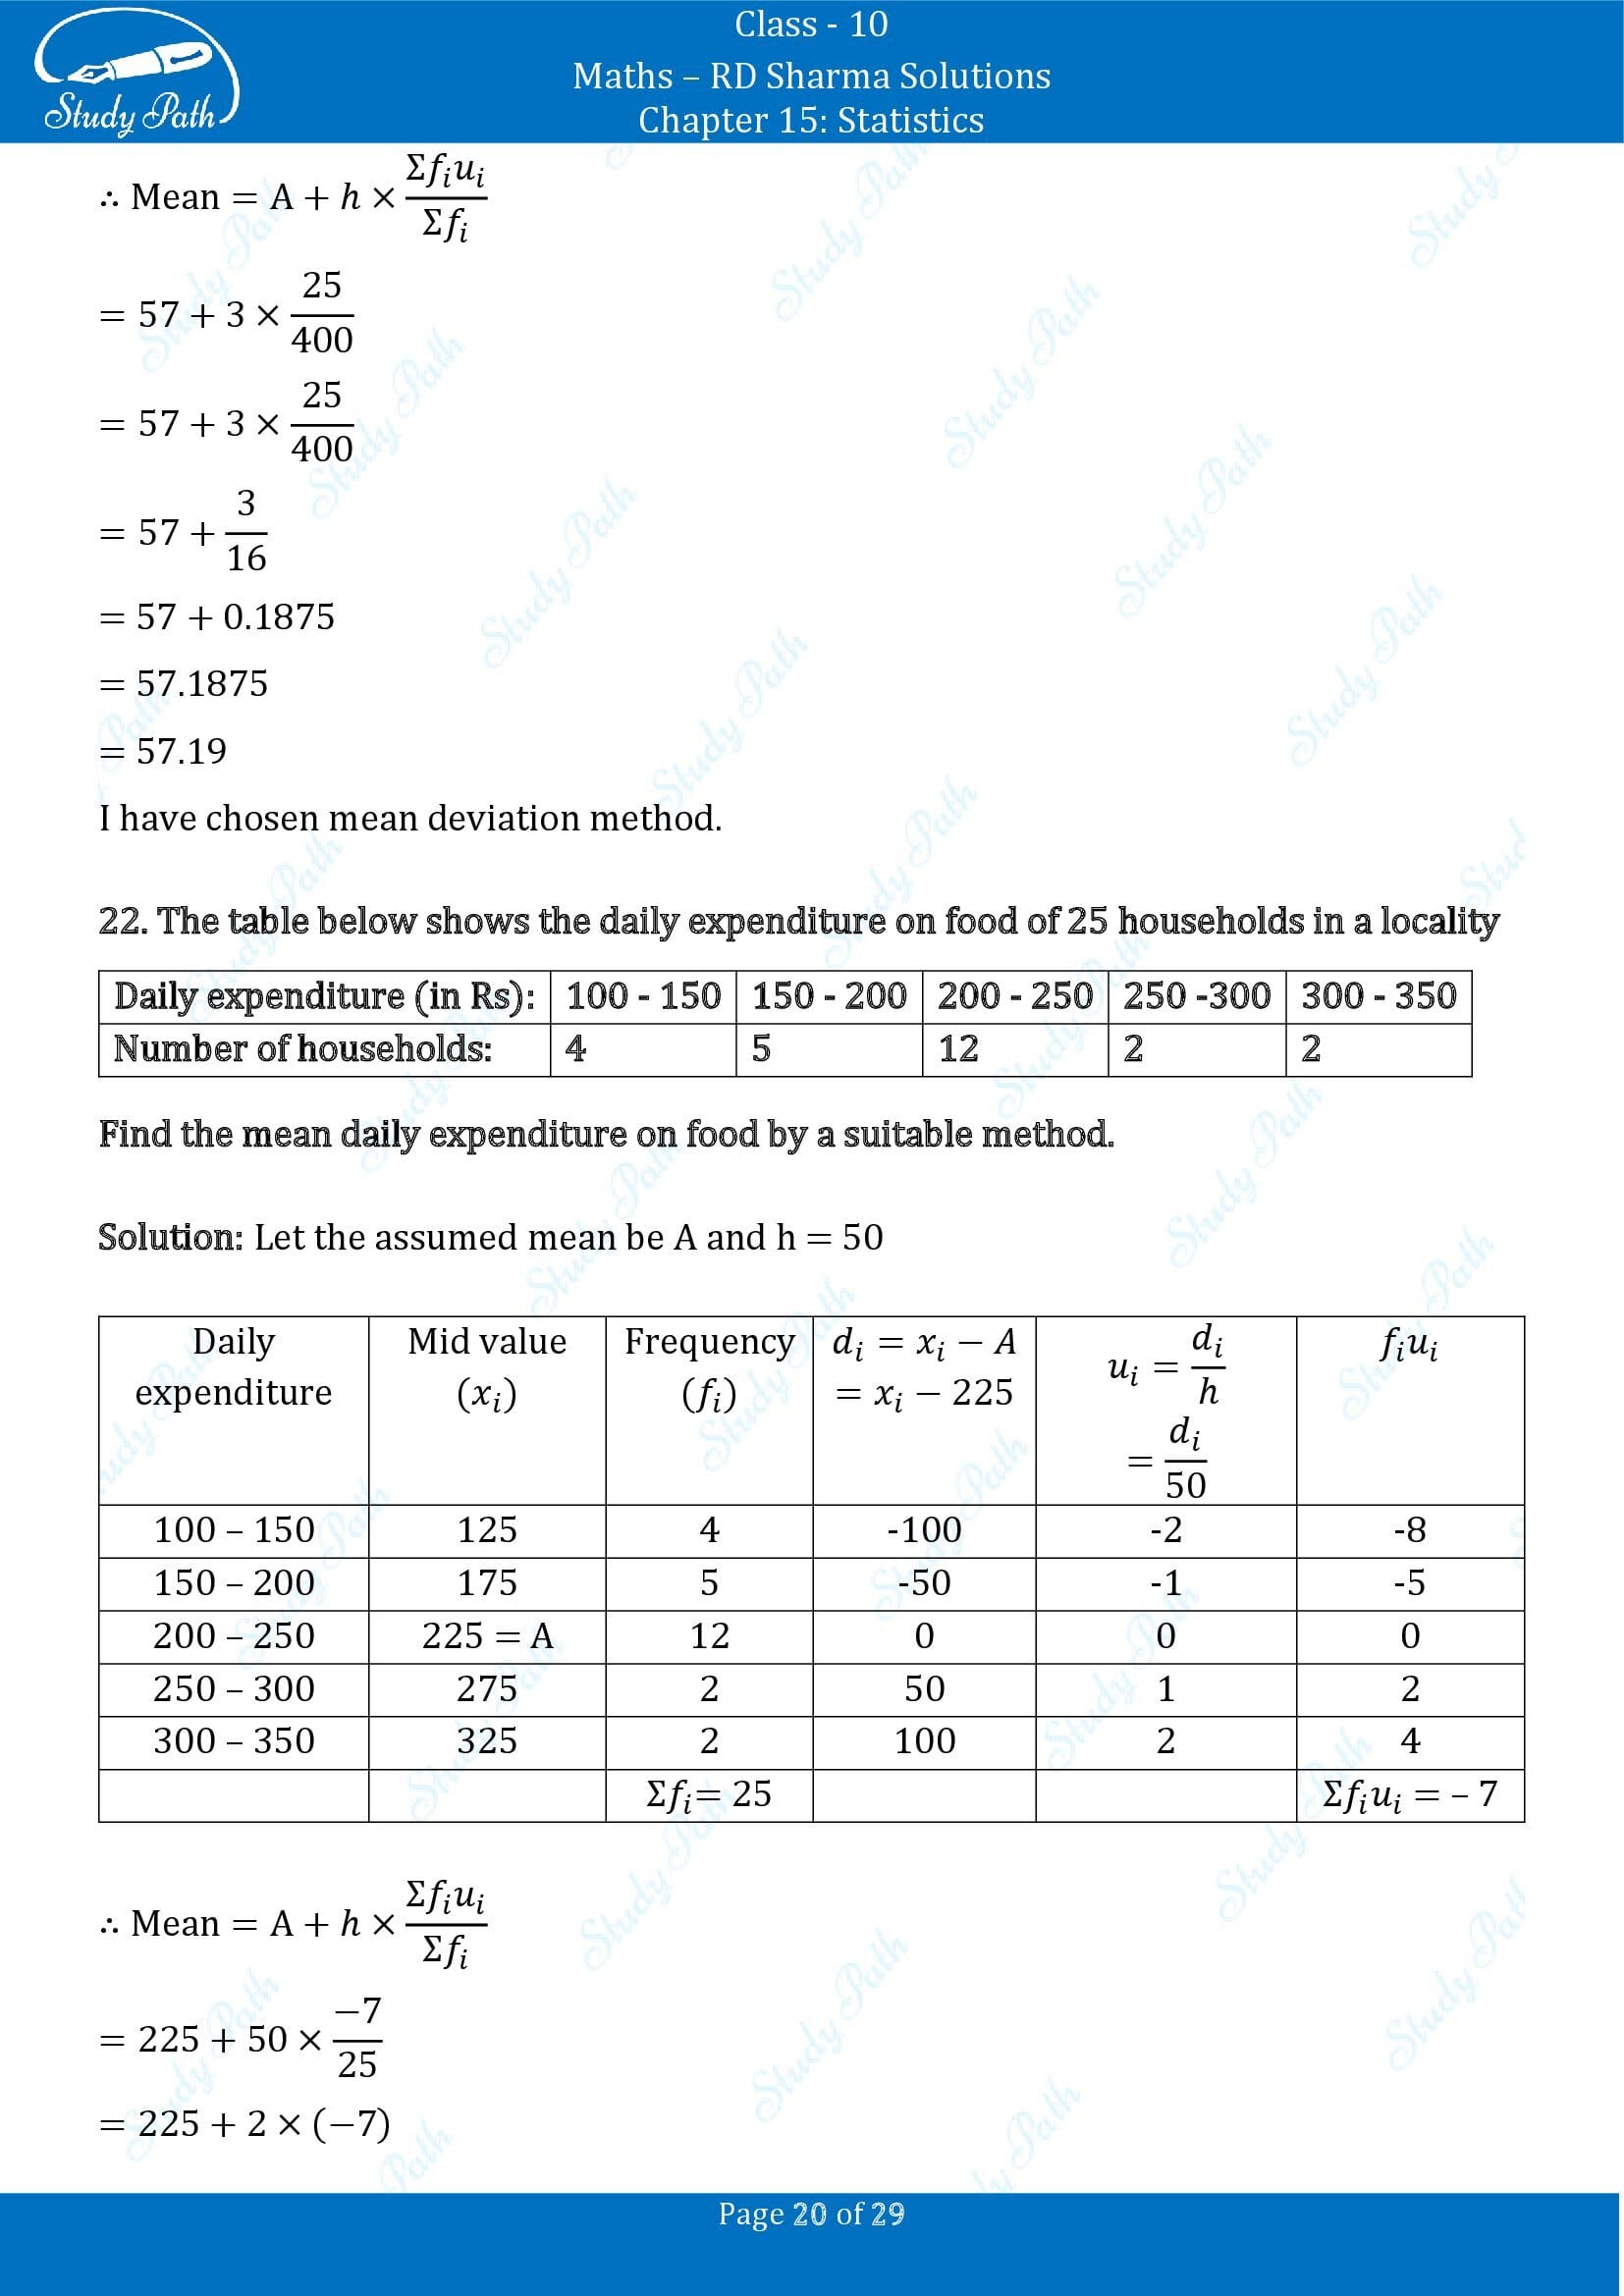 RD Sharma Solutions Class 10 Chapter 15 Statistics Exercise 15.3 0020